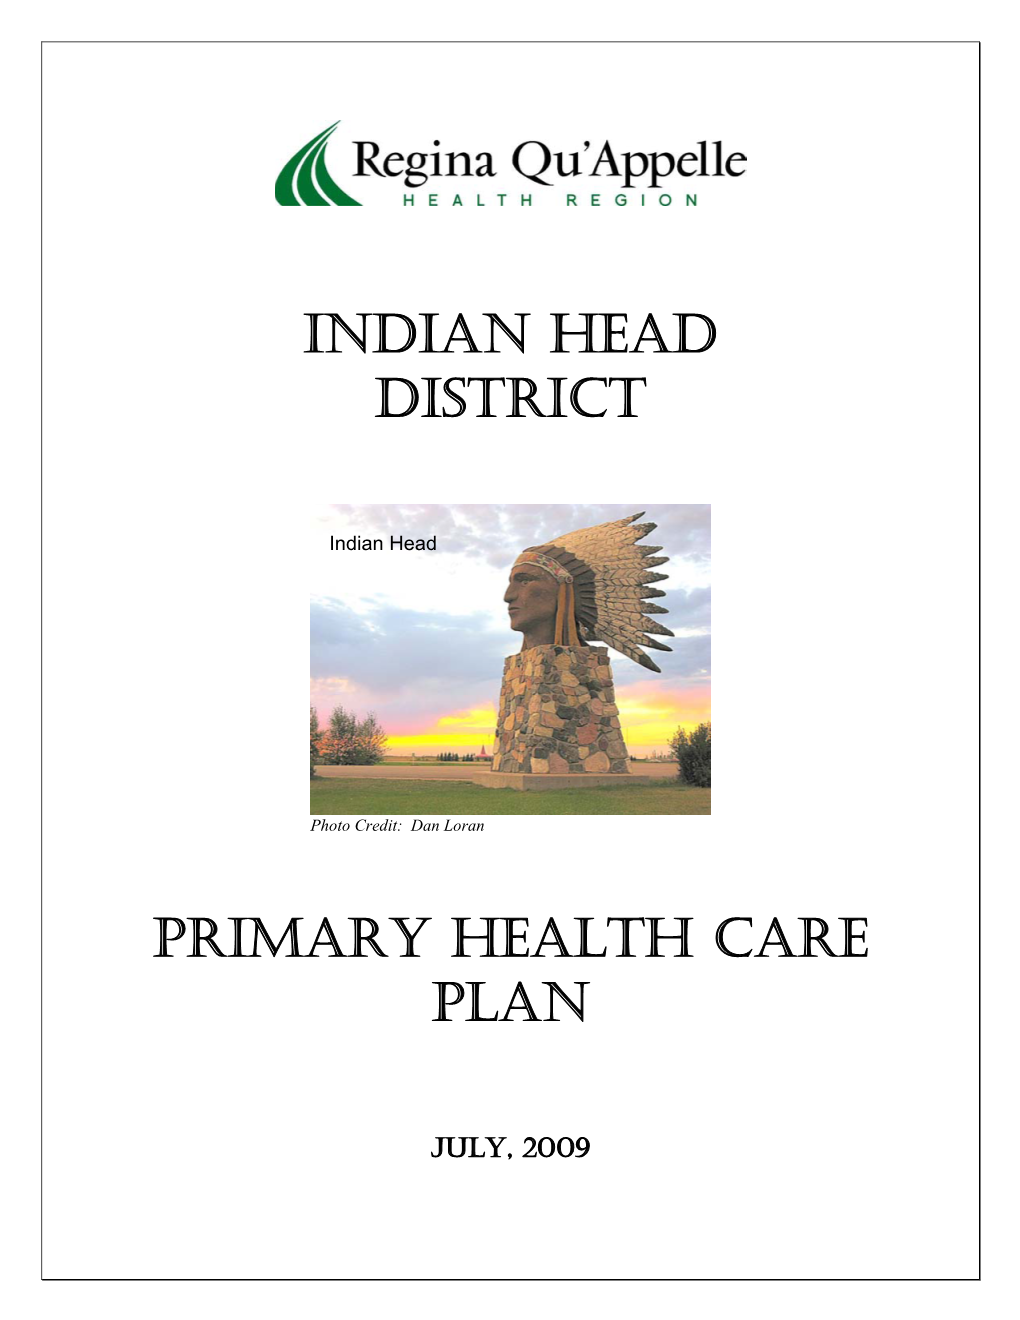 Indian Head District Primary Health Care Plan